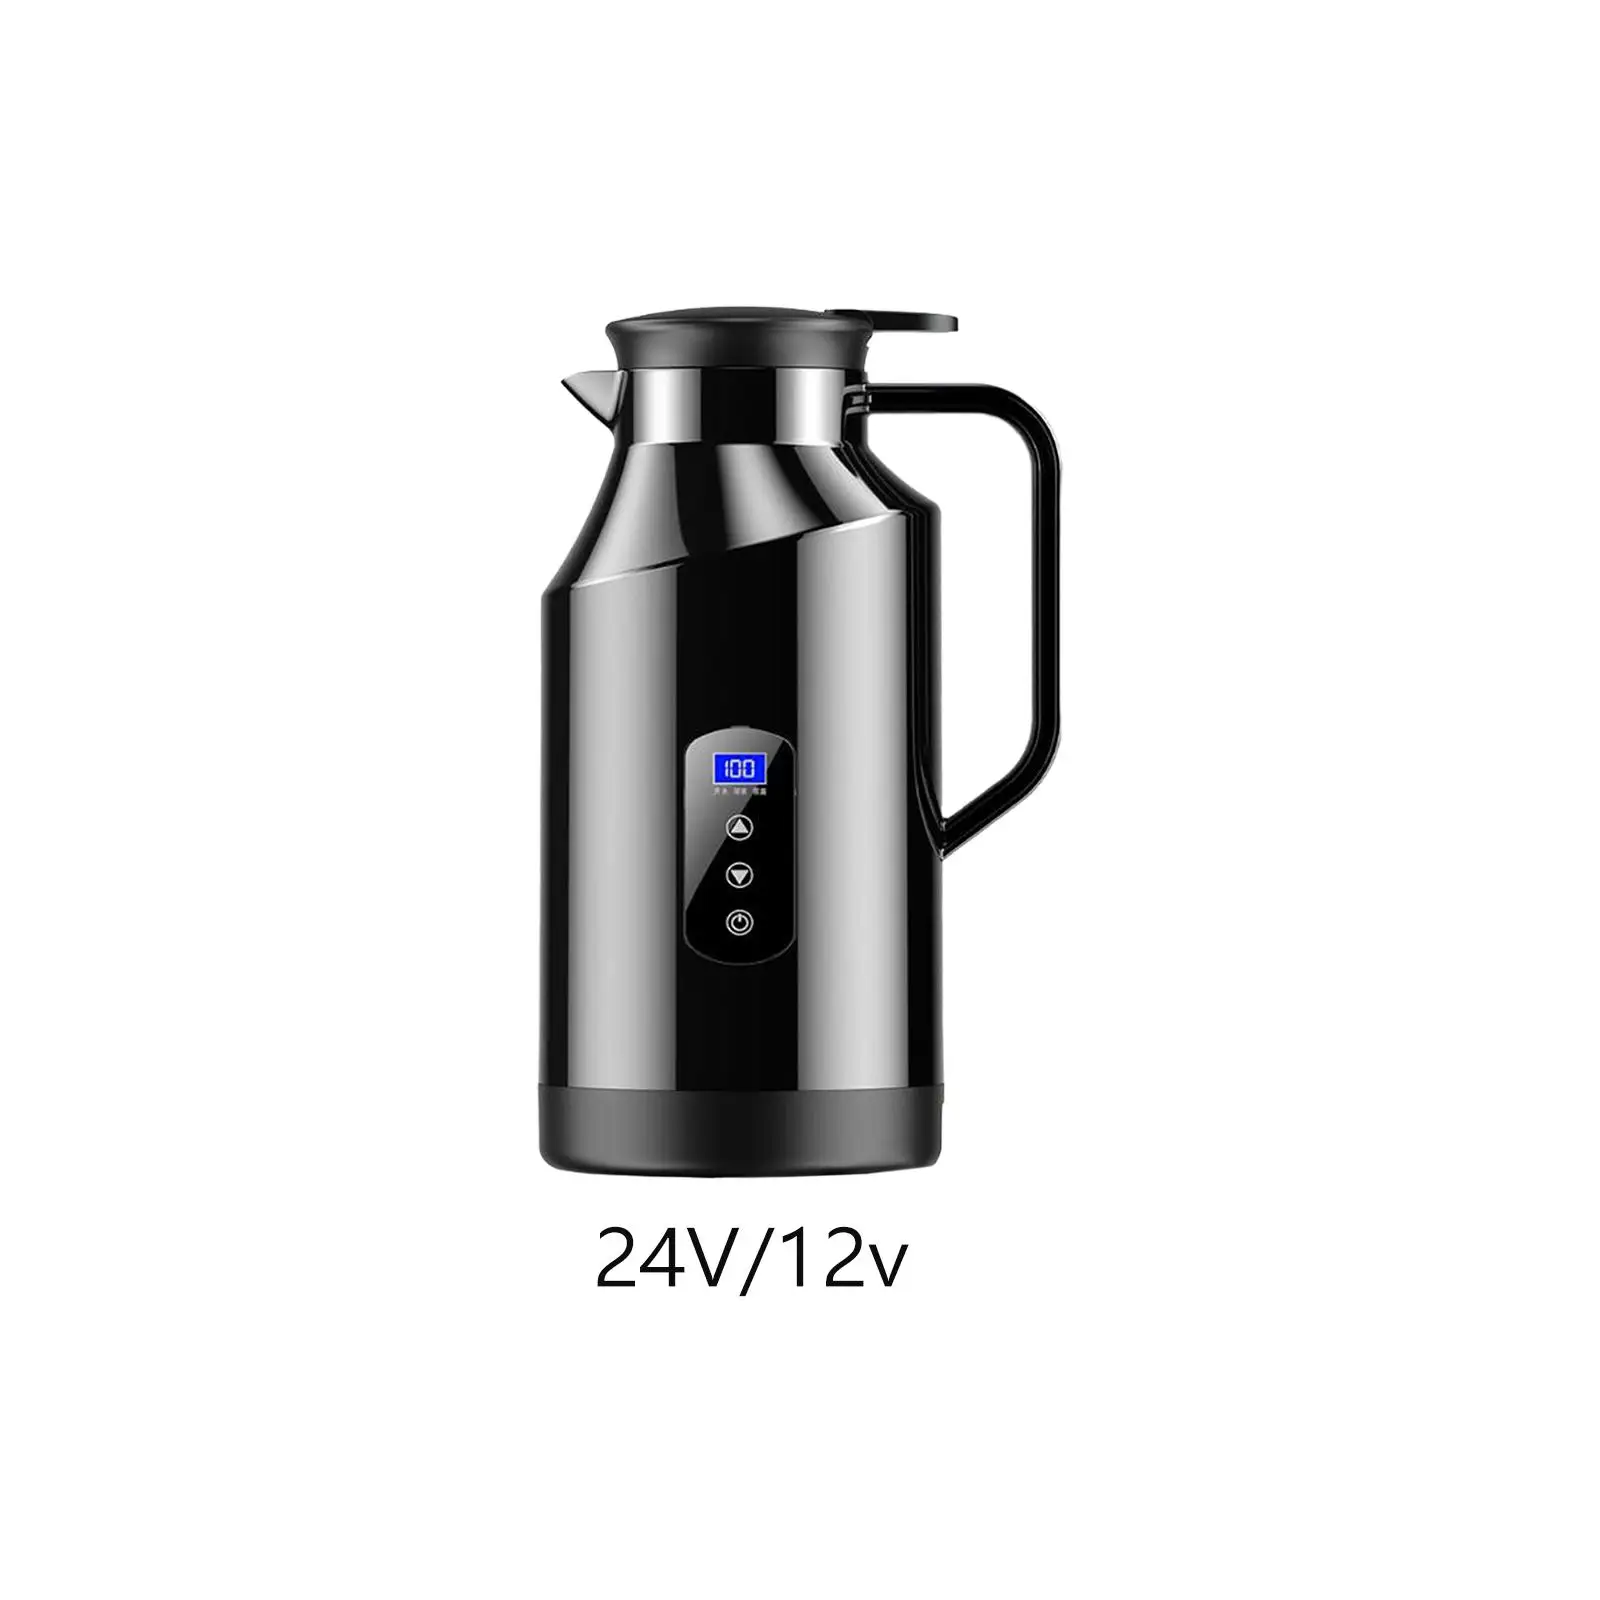 1.2L Stainless Steel Coffee Warmer Car Mug for Water Tea Coffee Milk Car Kettle Boiler for Self Driving Tour Camping